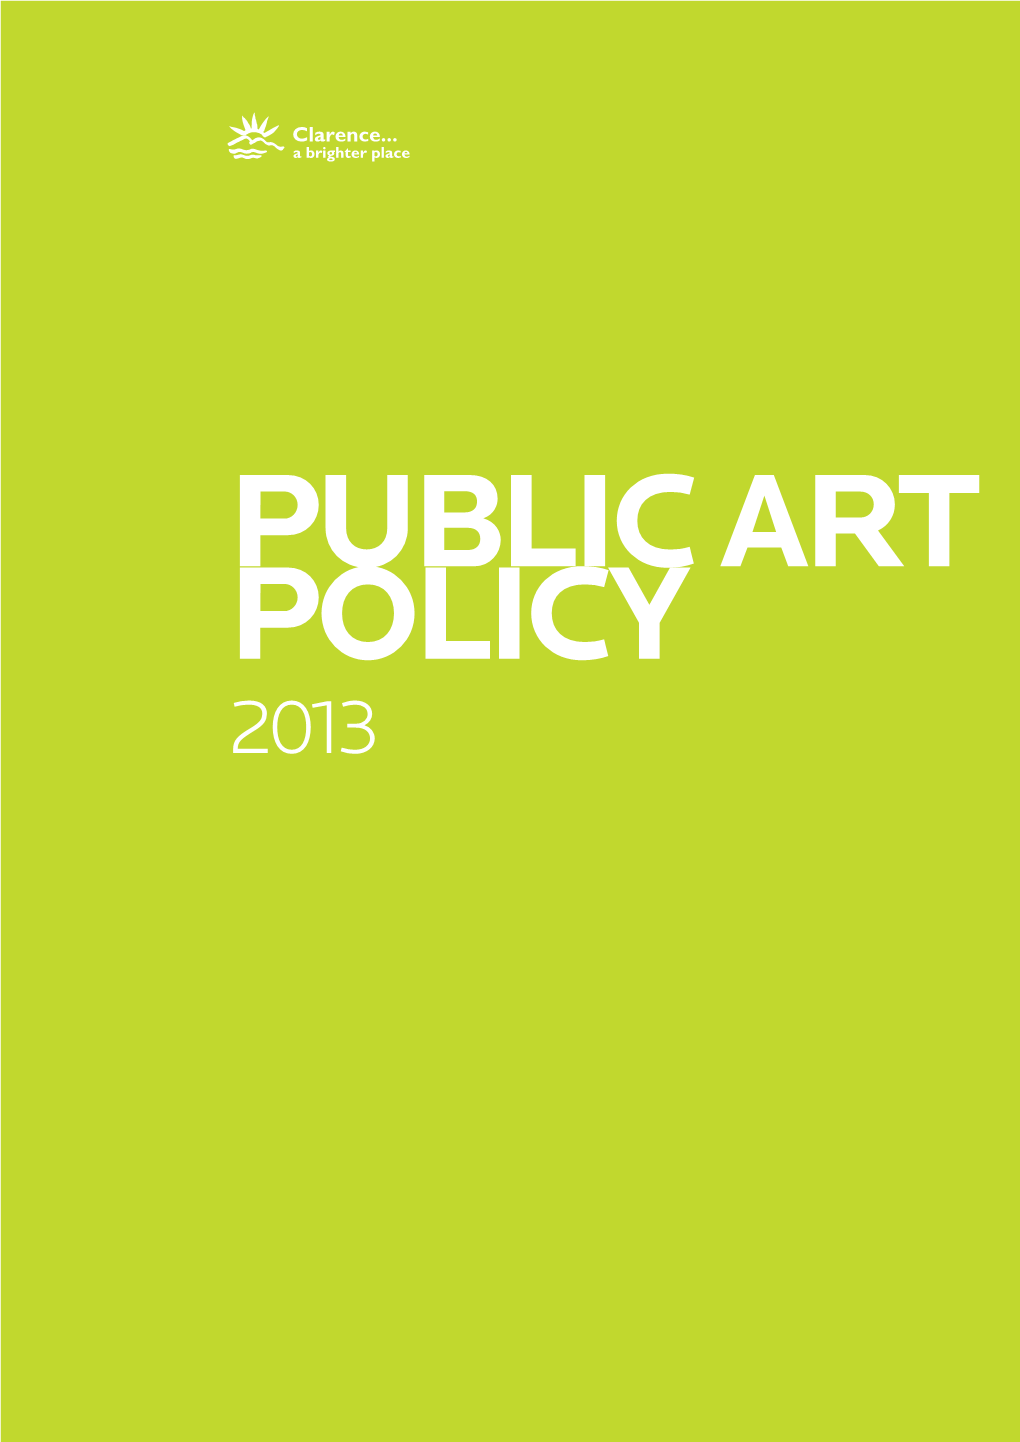 PUBLIC Art POLICY 2013 Contents